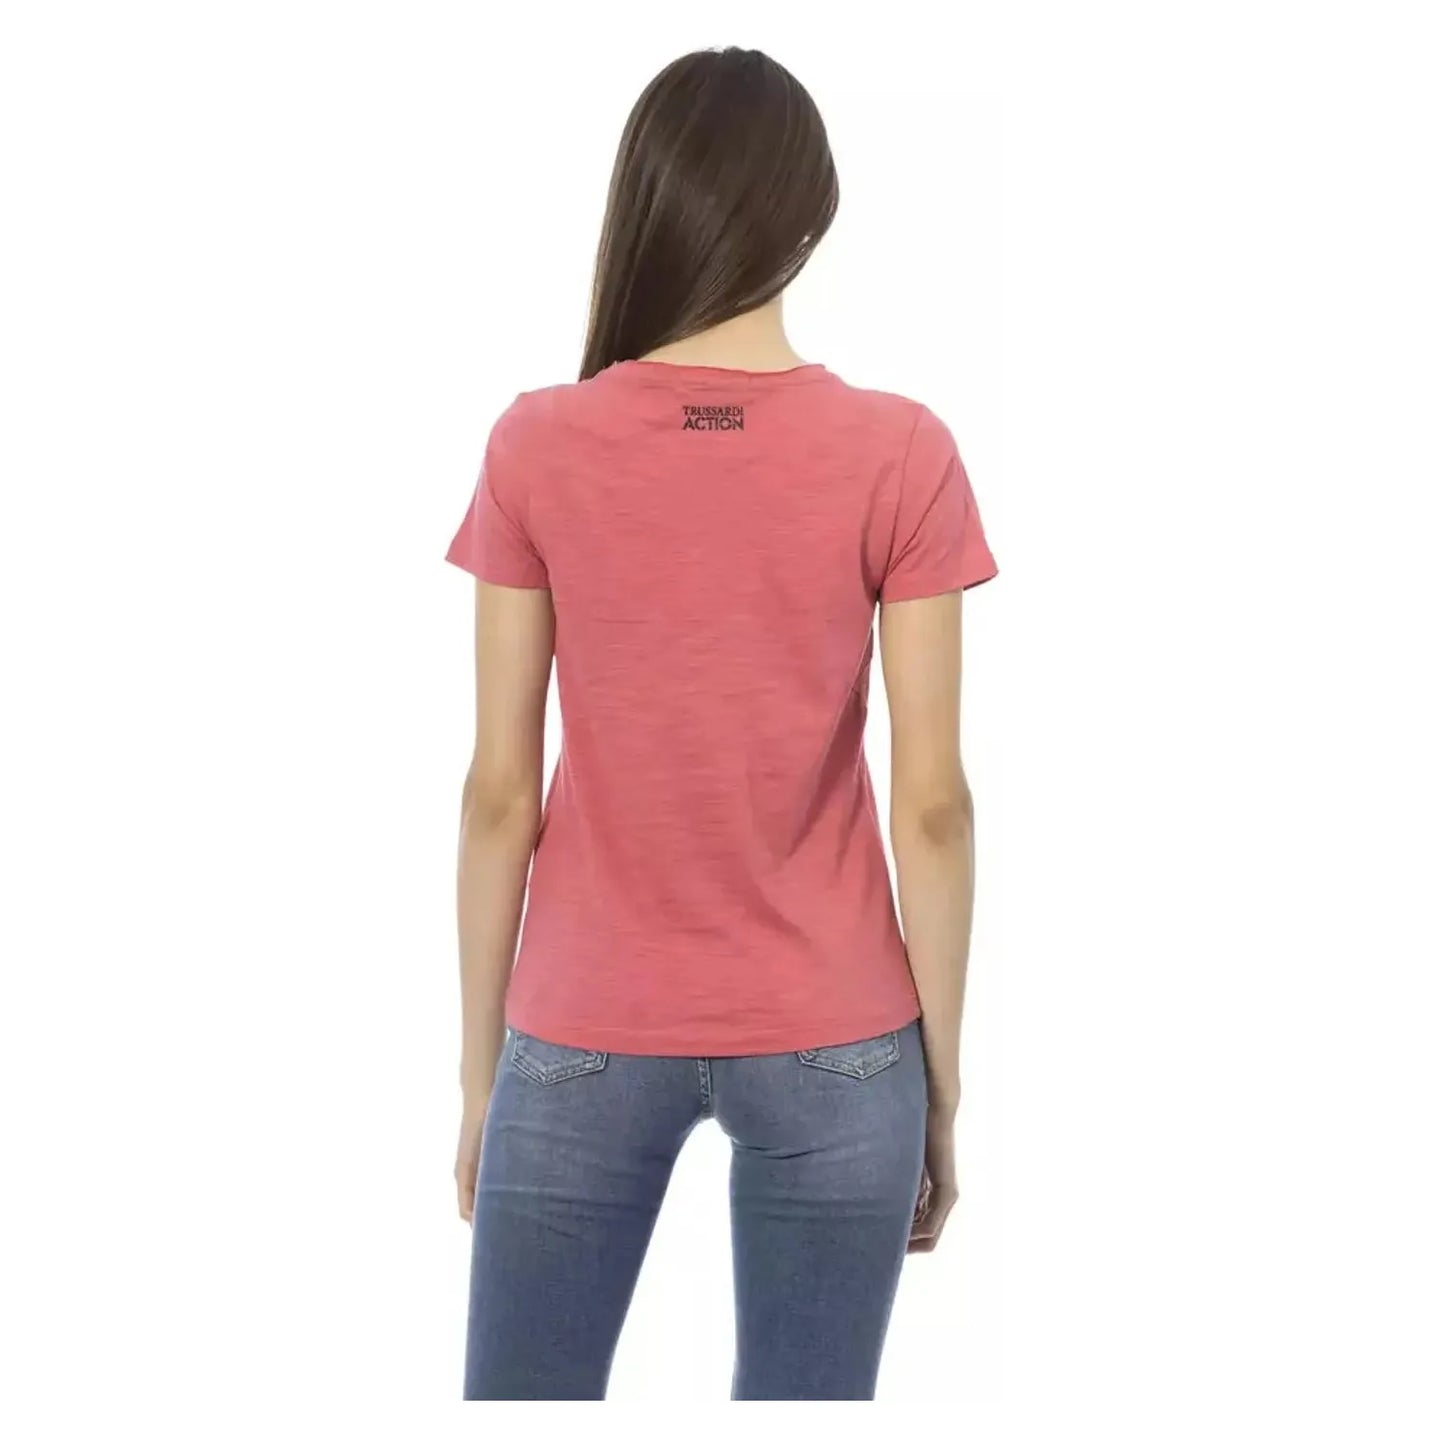 Trussardi Action Elegant Pink Round Neck Tee with Chic Front Print pink-cotton-tops-t-shirt-38